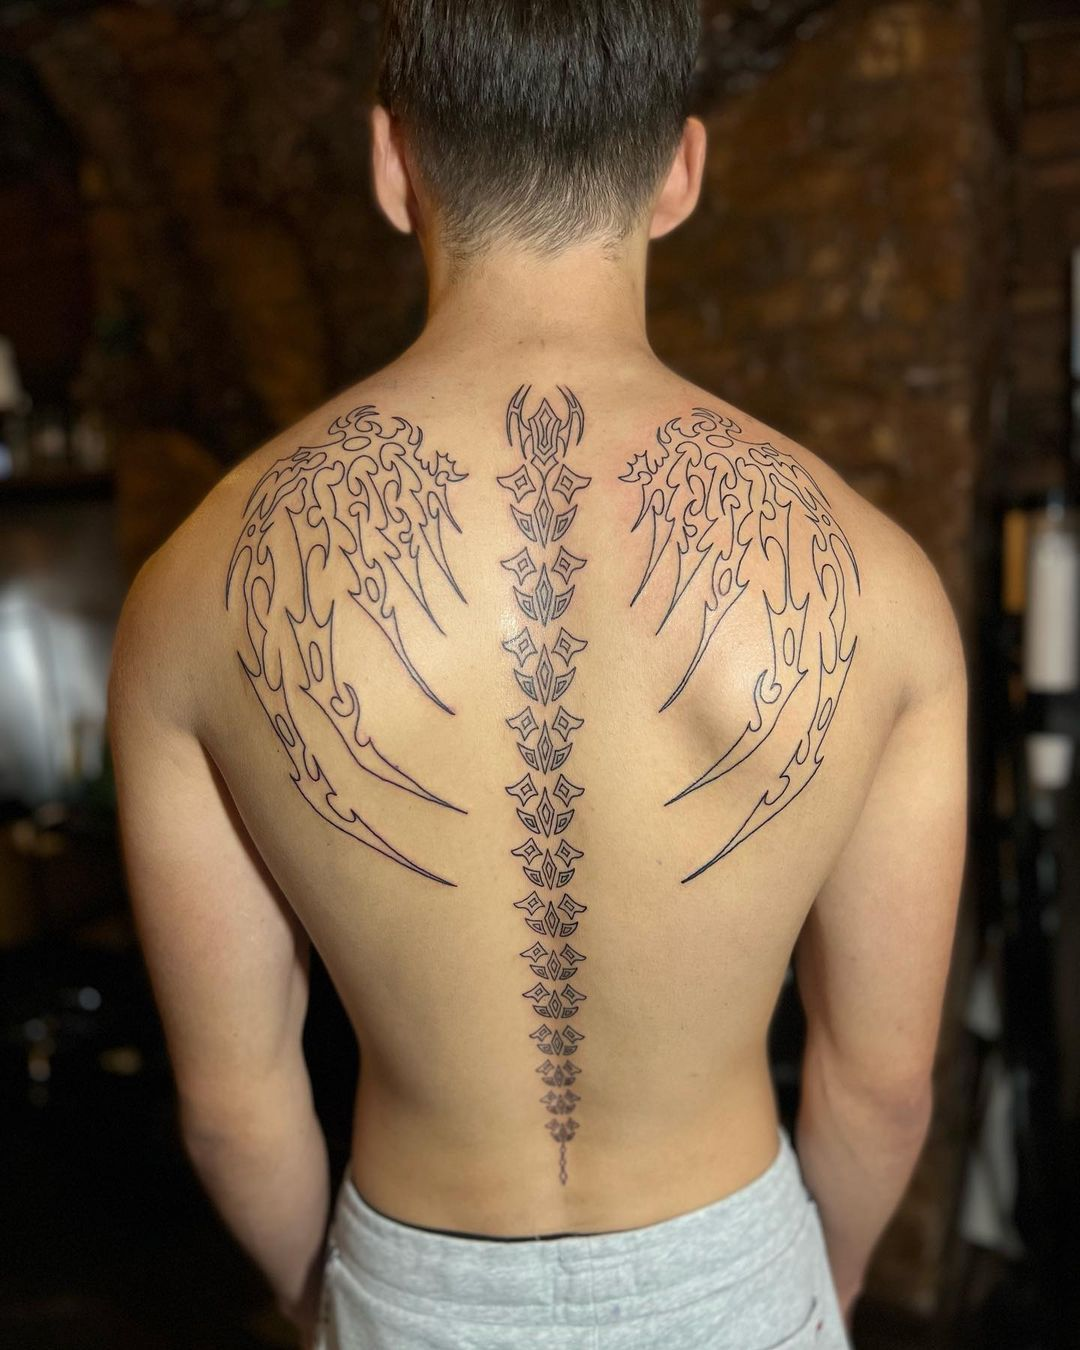 Lower Back Tattoos for Men  Ideas and Designs for Guys